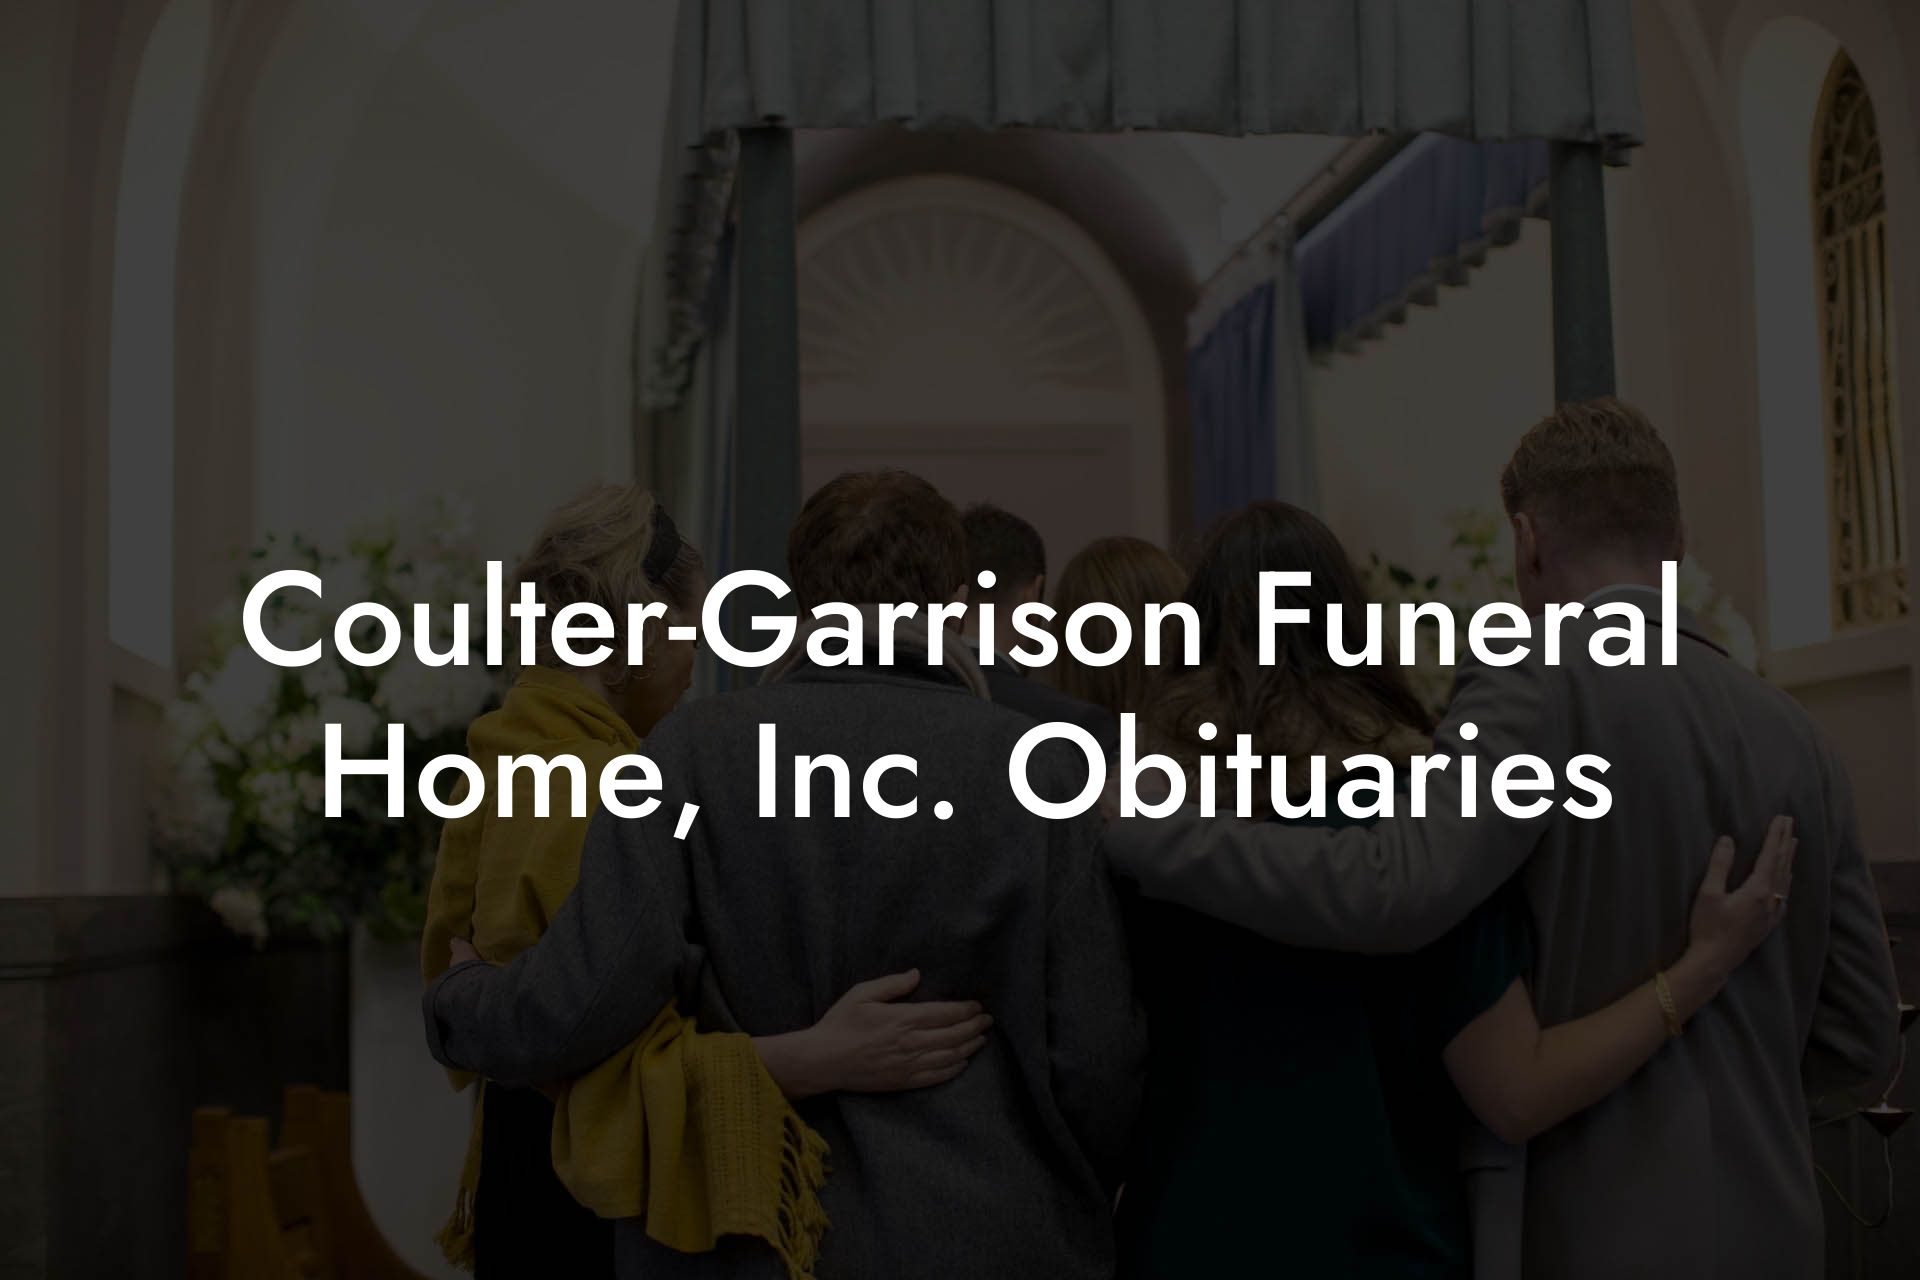 Coulter-Garrison Funeral Home, Inc. Obituaries